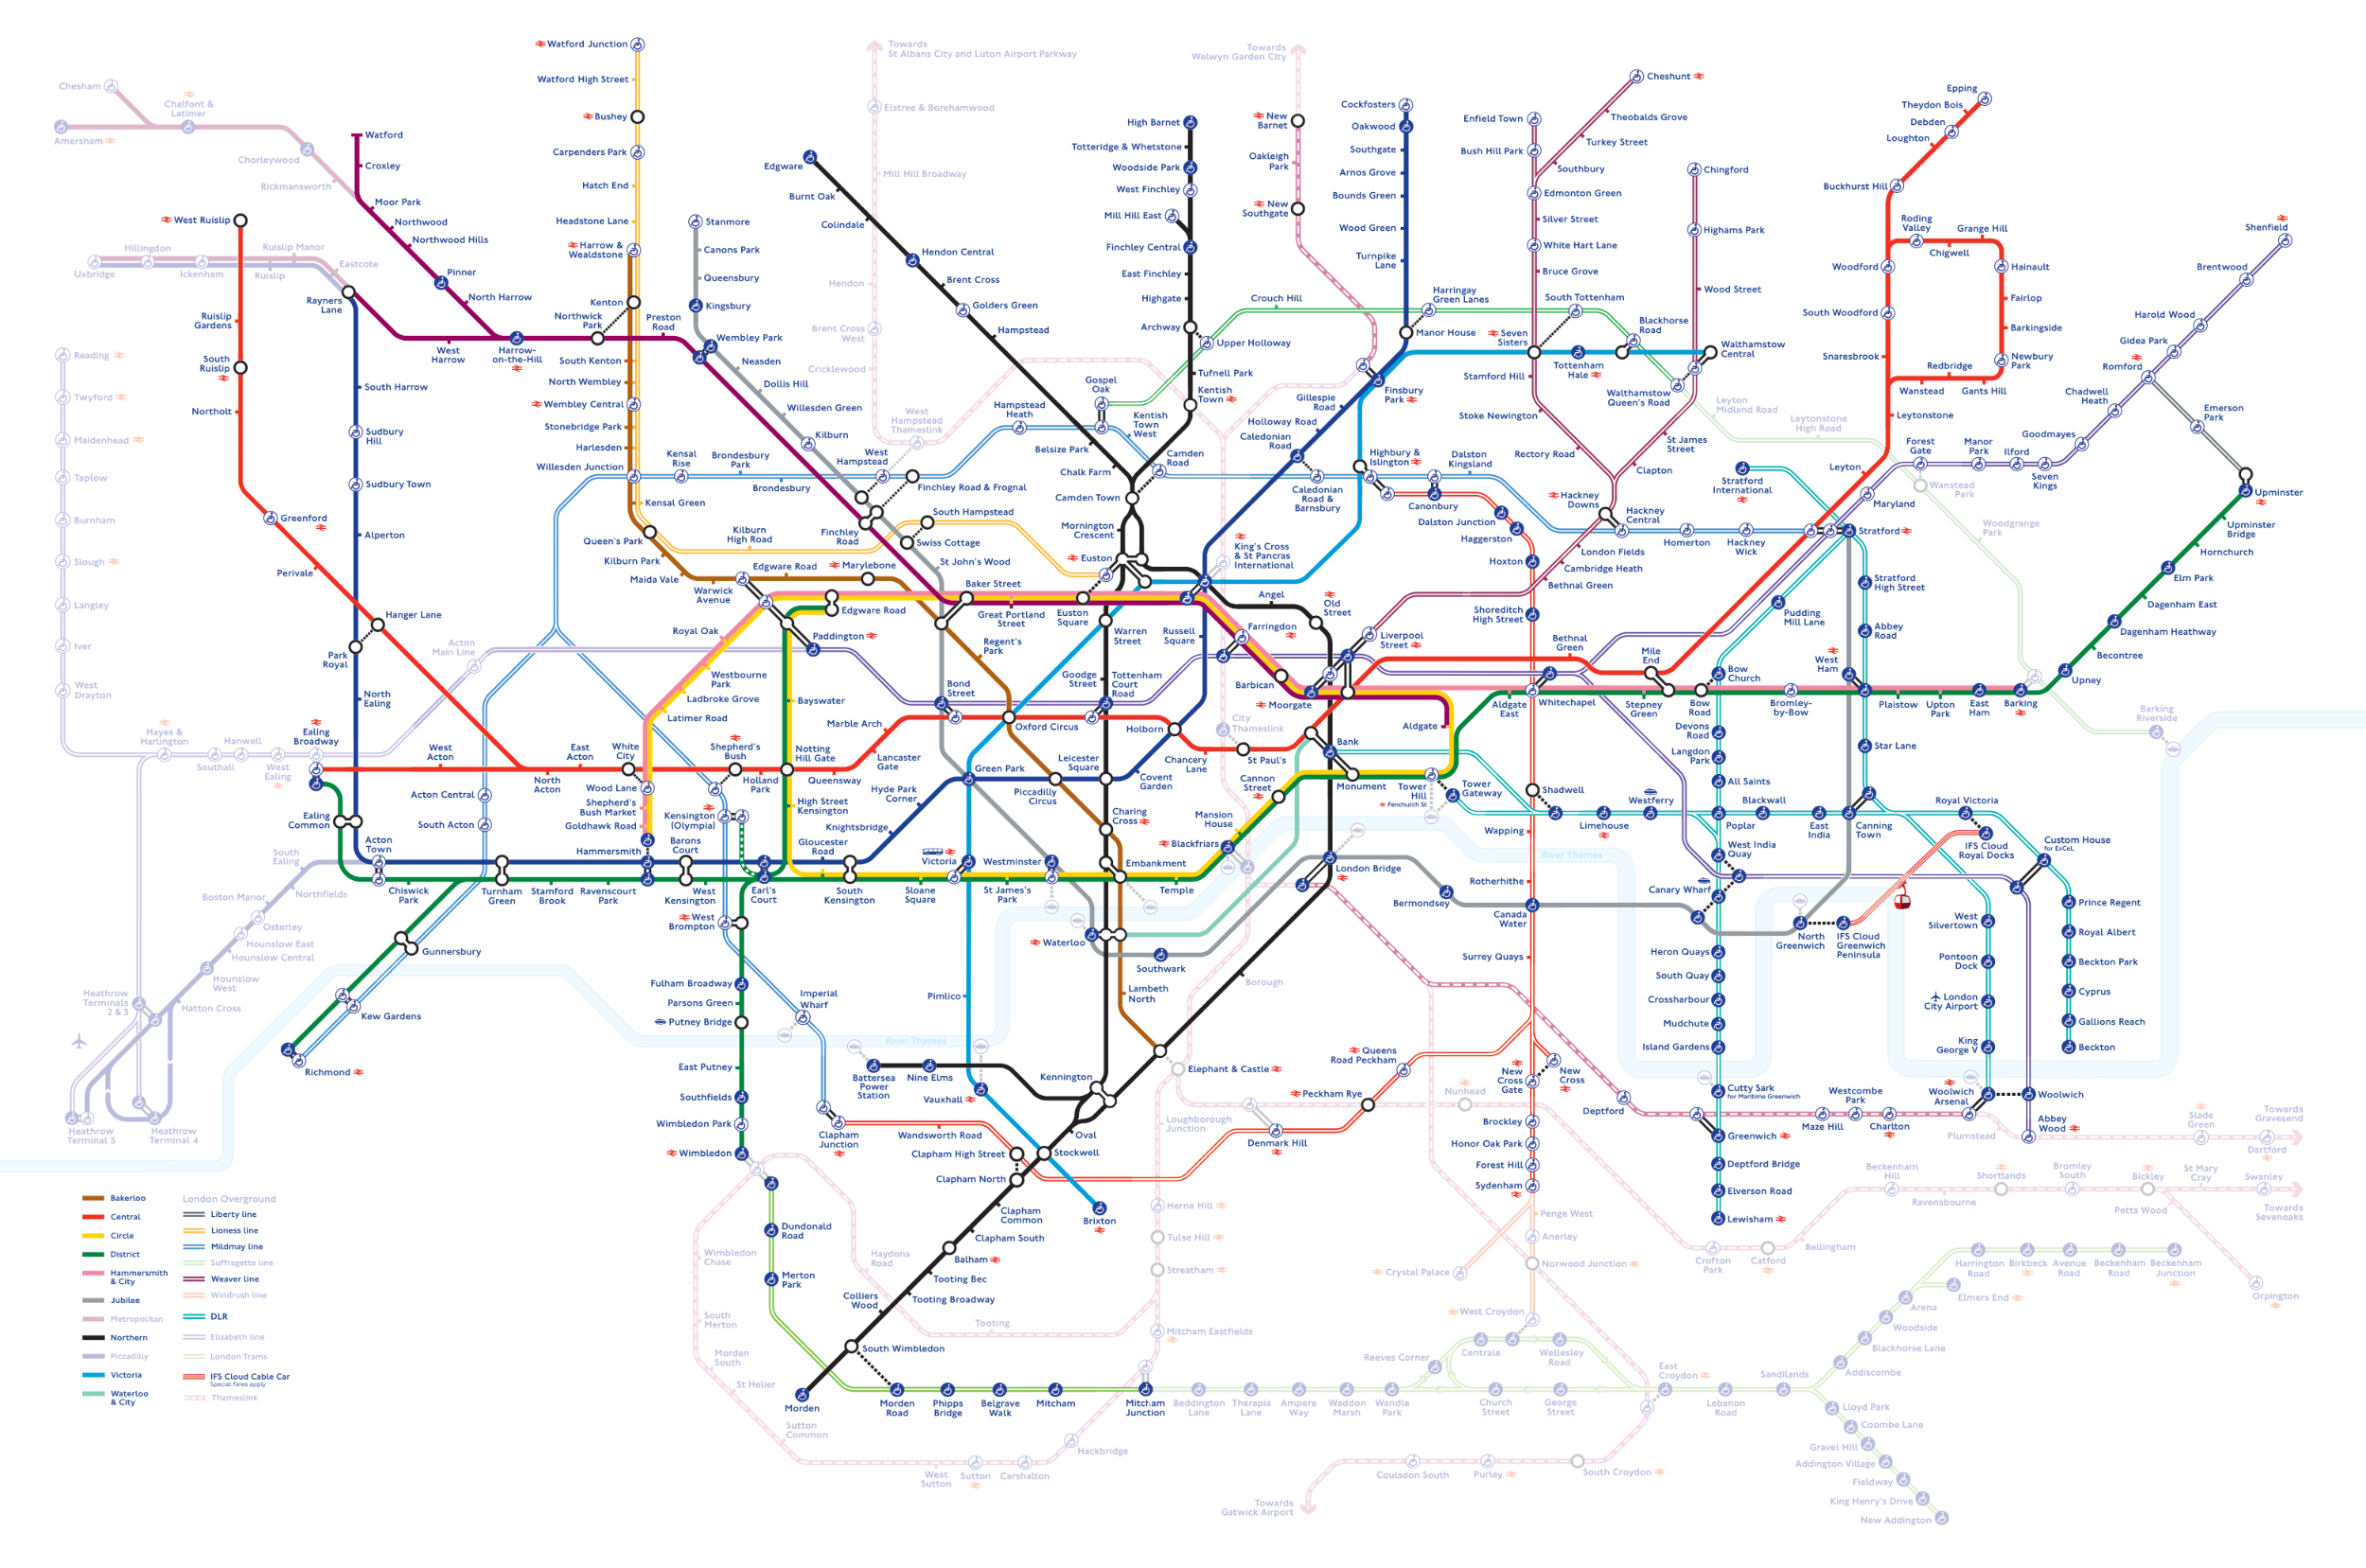 A map showing the parts of the TfL map that I have walked.